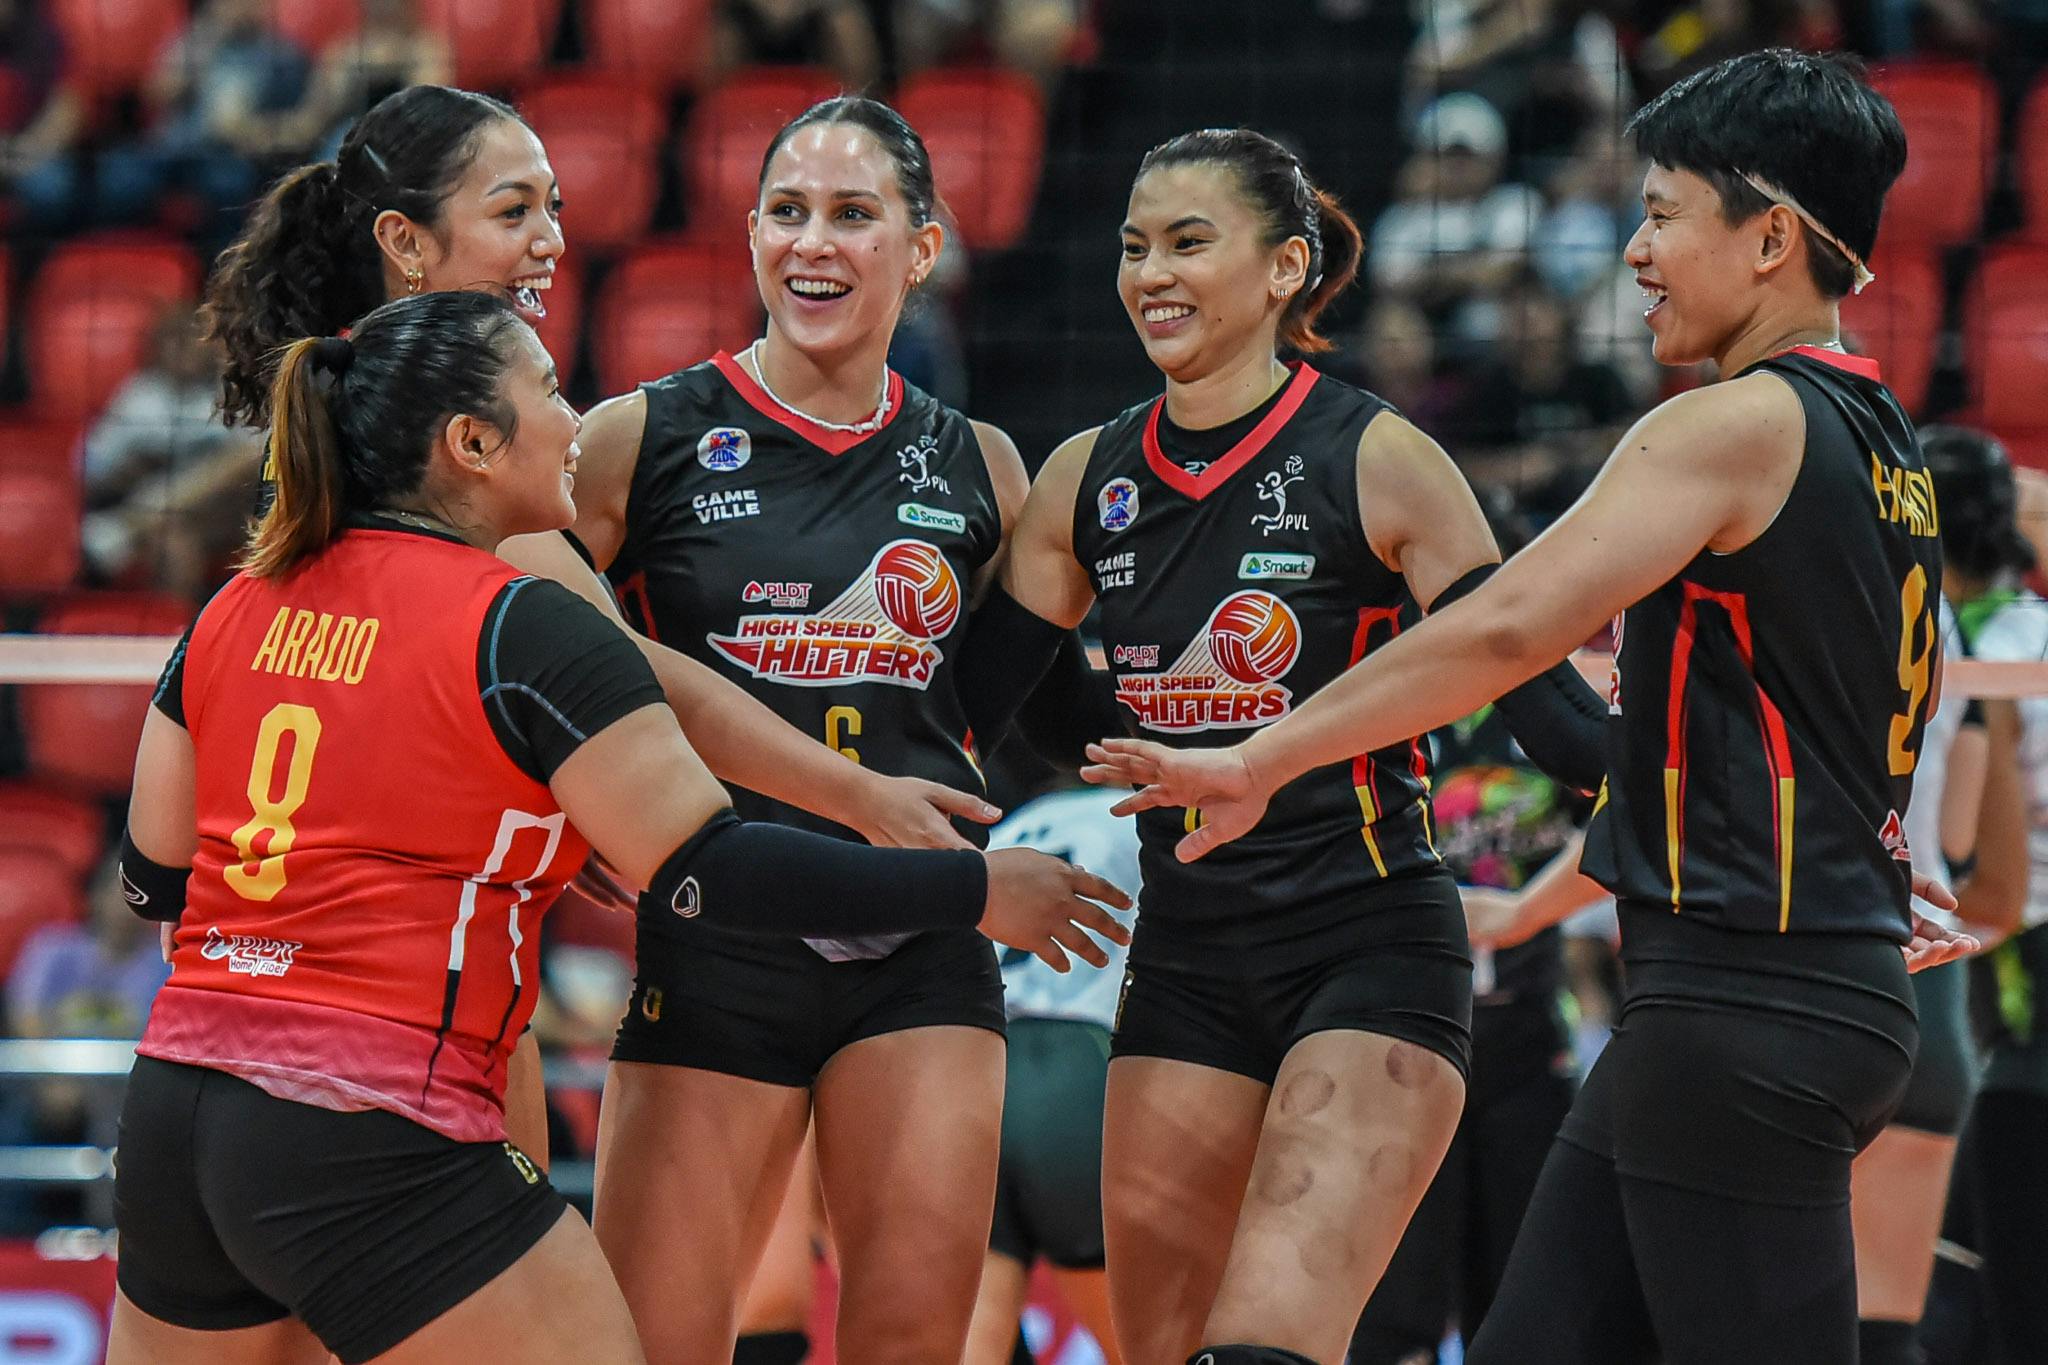 PVL: PLDT sweeps Nxled for second straight win